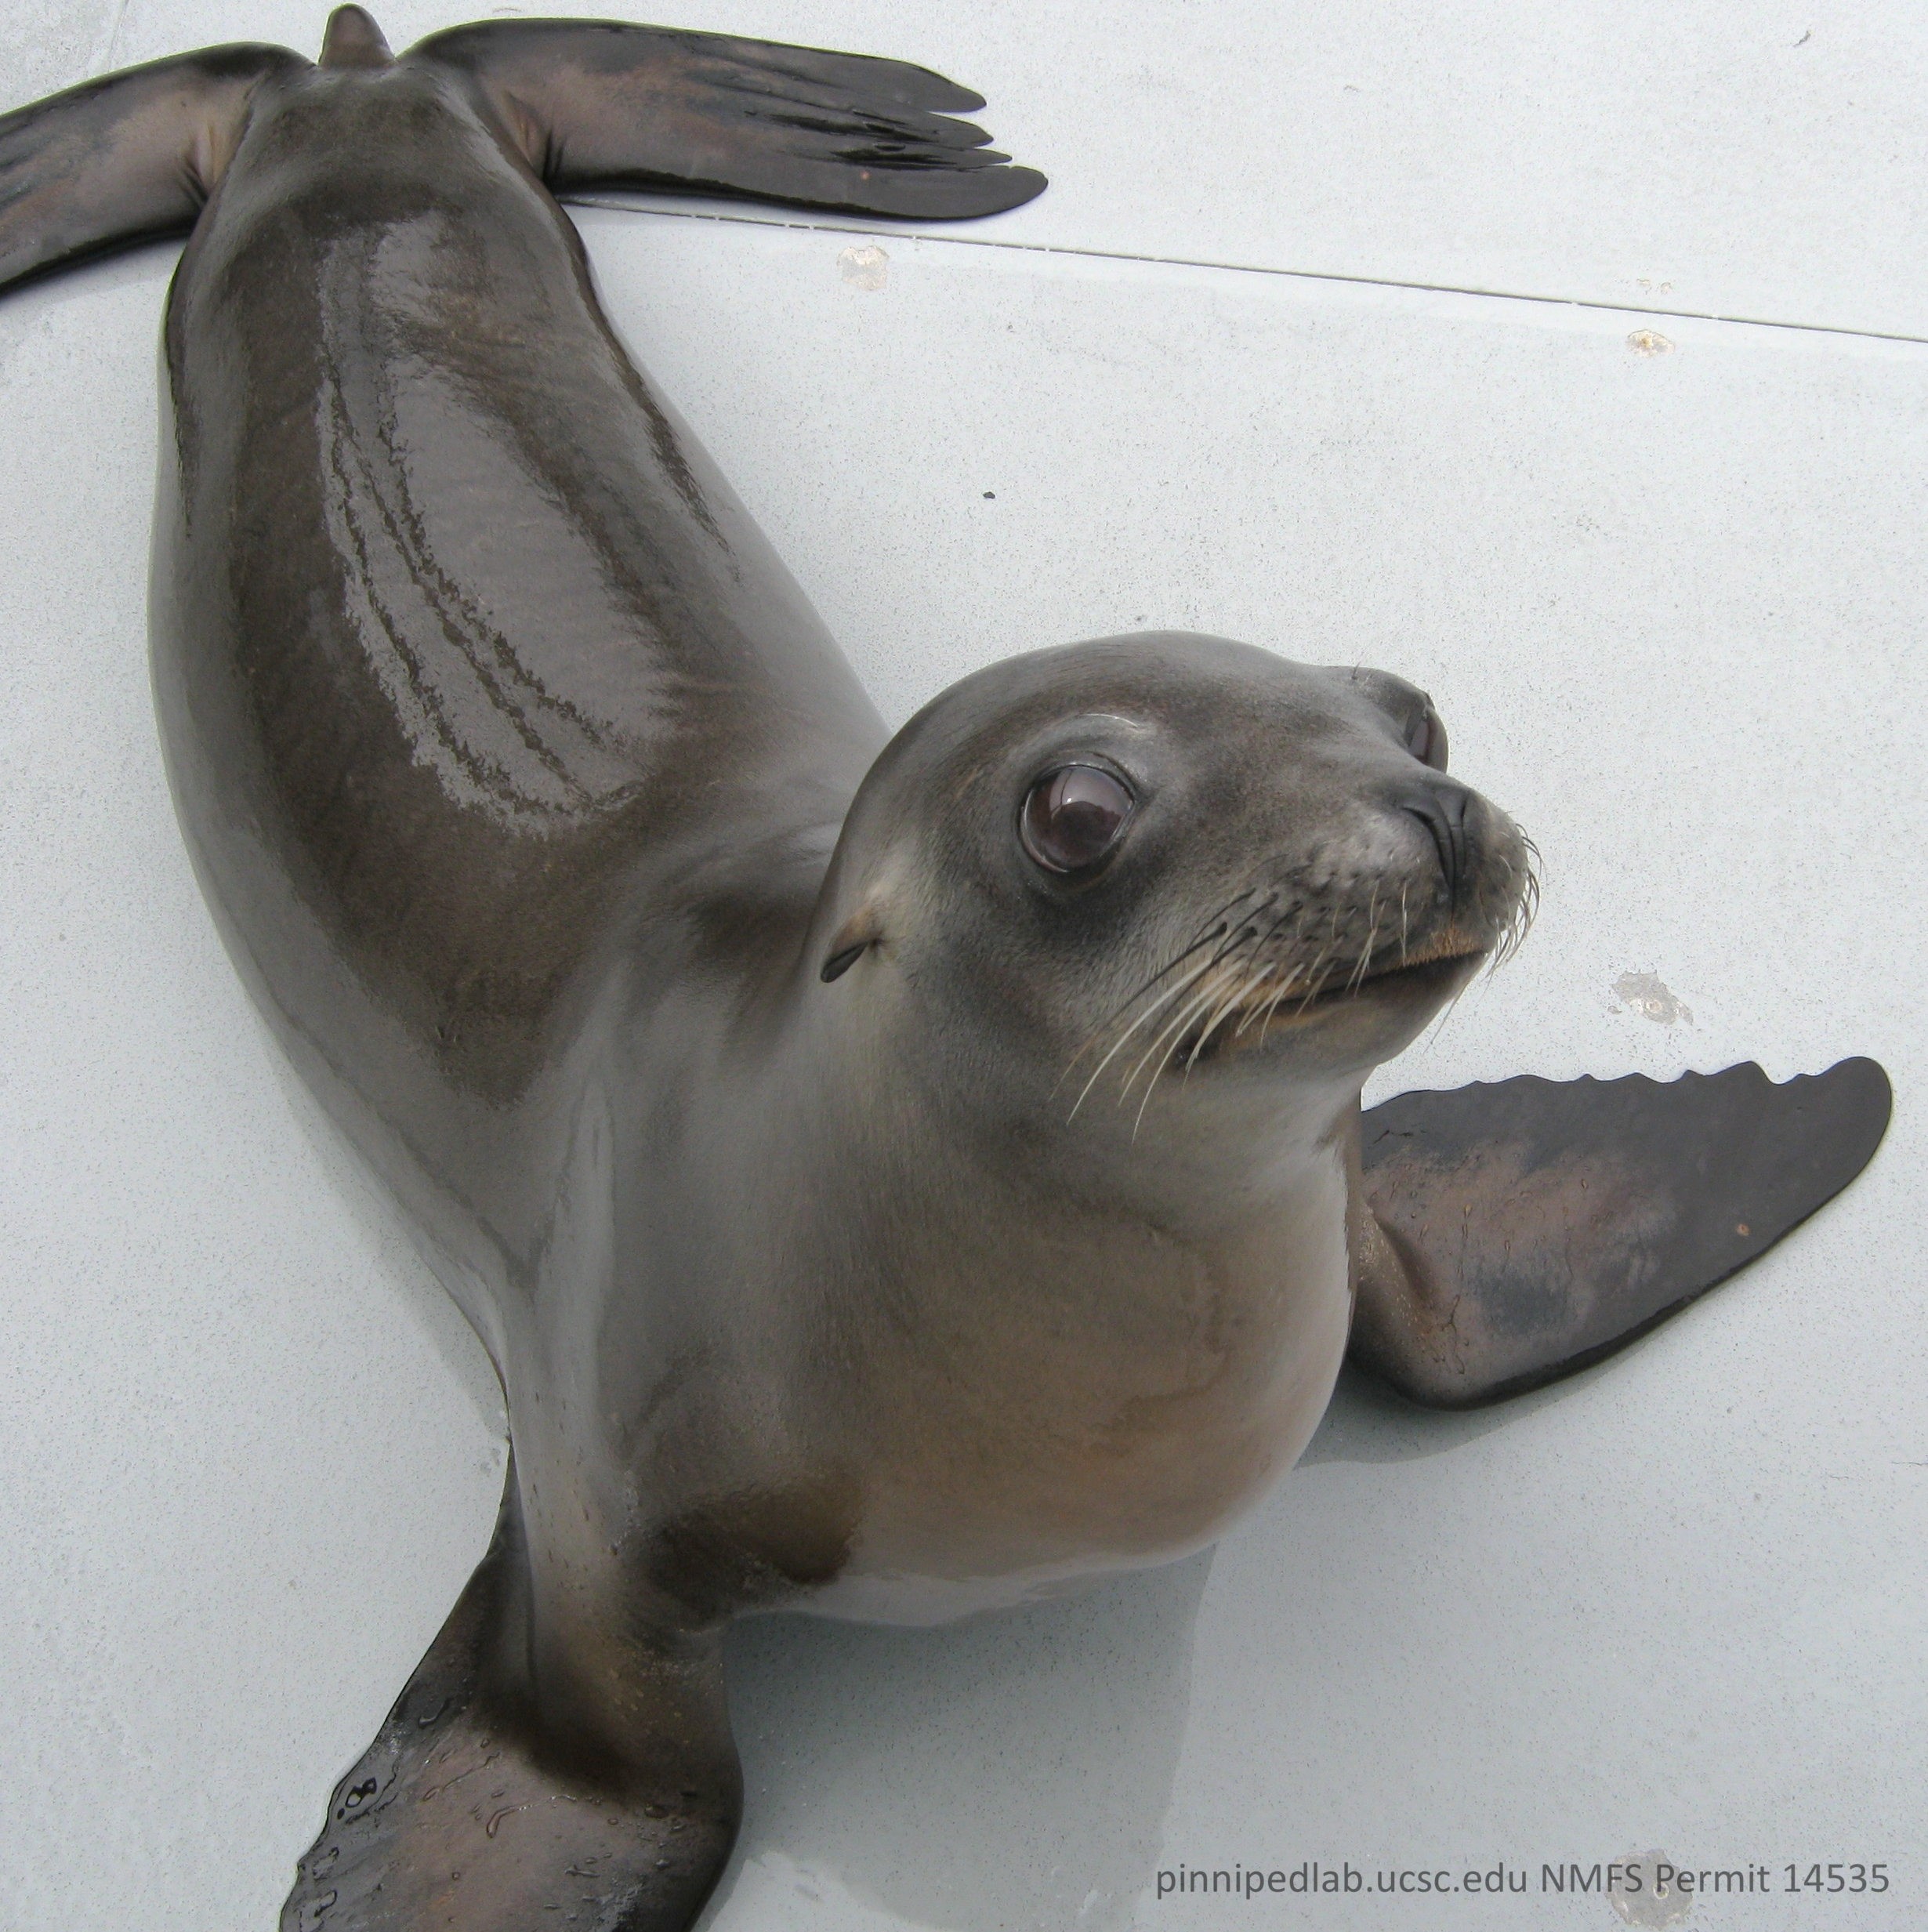 By keeping the beat, sea lion sheds new light on animals' movements ...